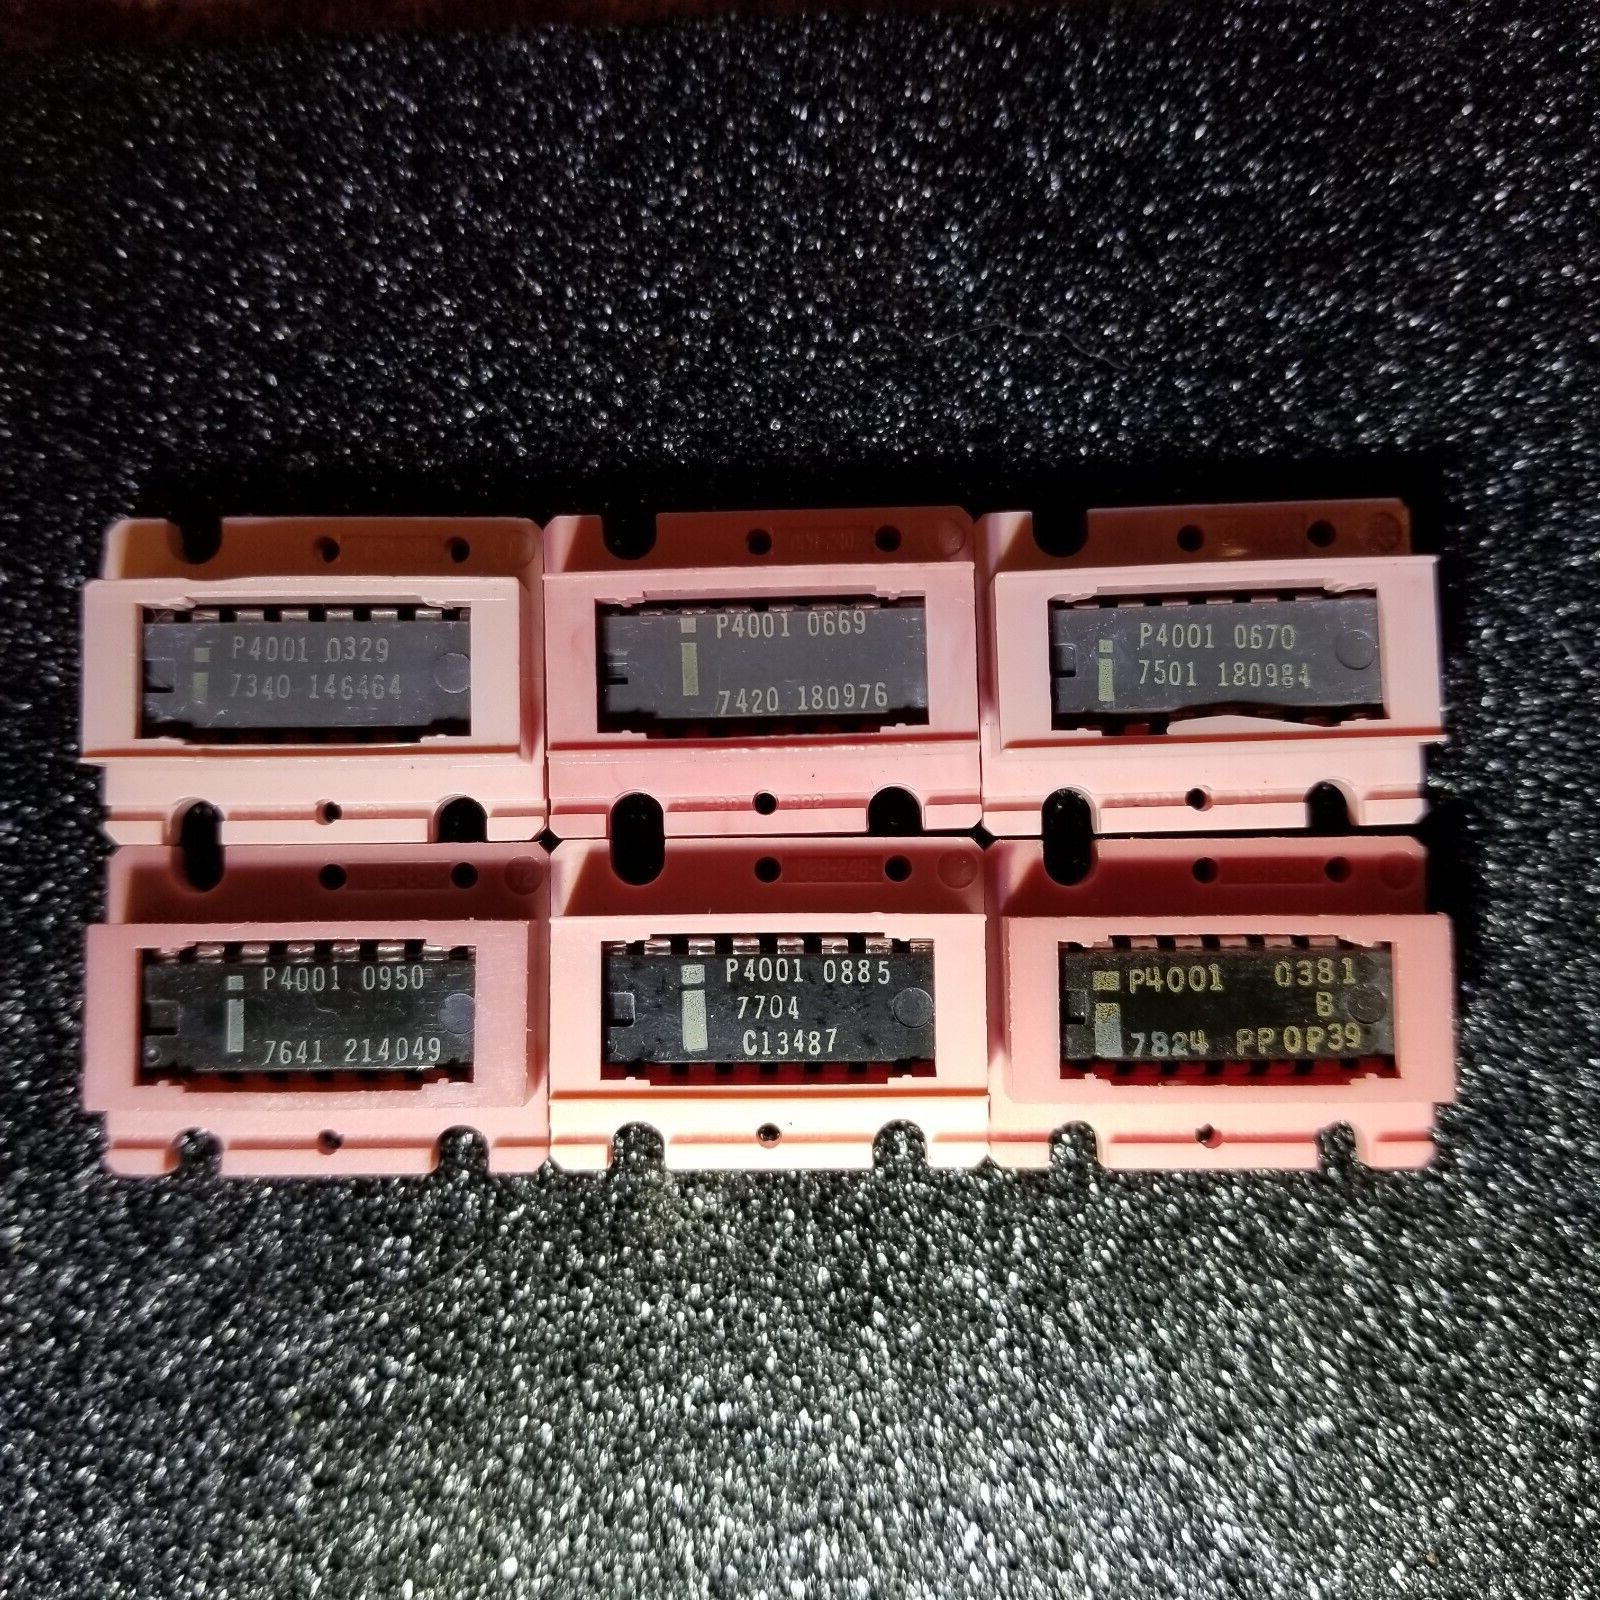 P4001 Intel + Carriers, 73,74,75,76,77,78 date codes, Unused USA stock, (6pcs)